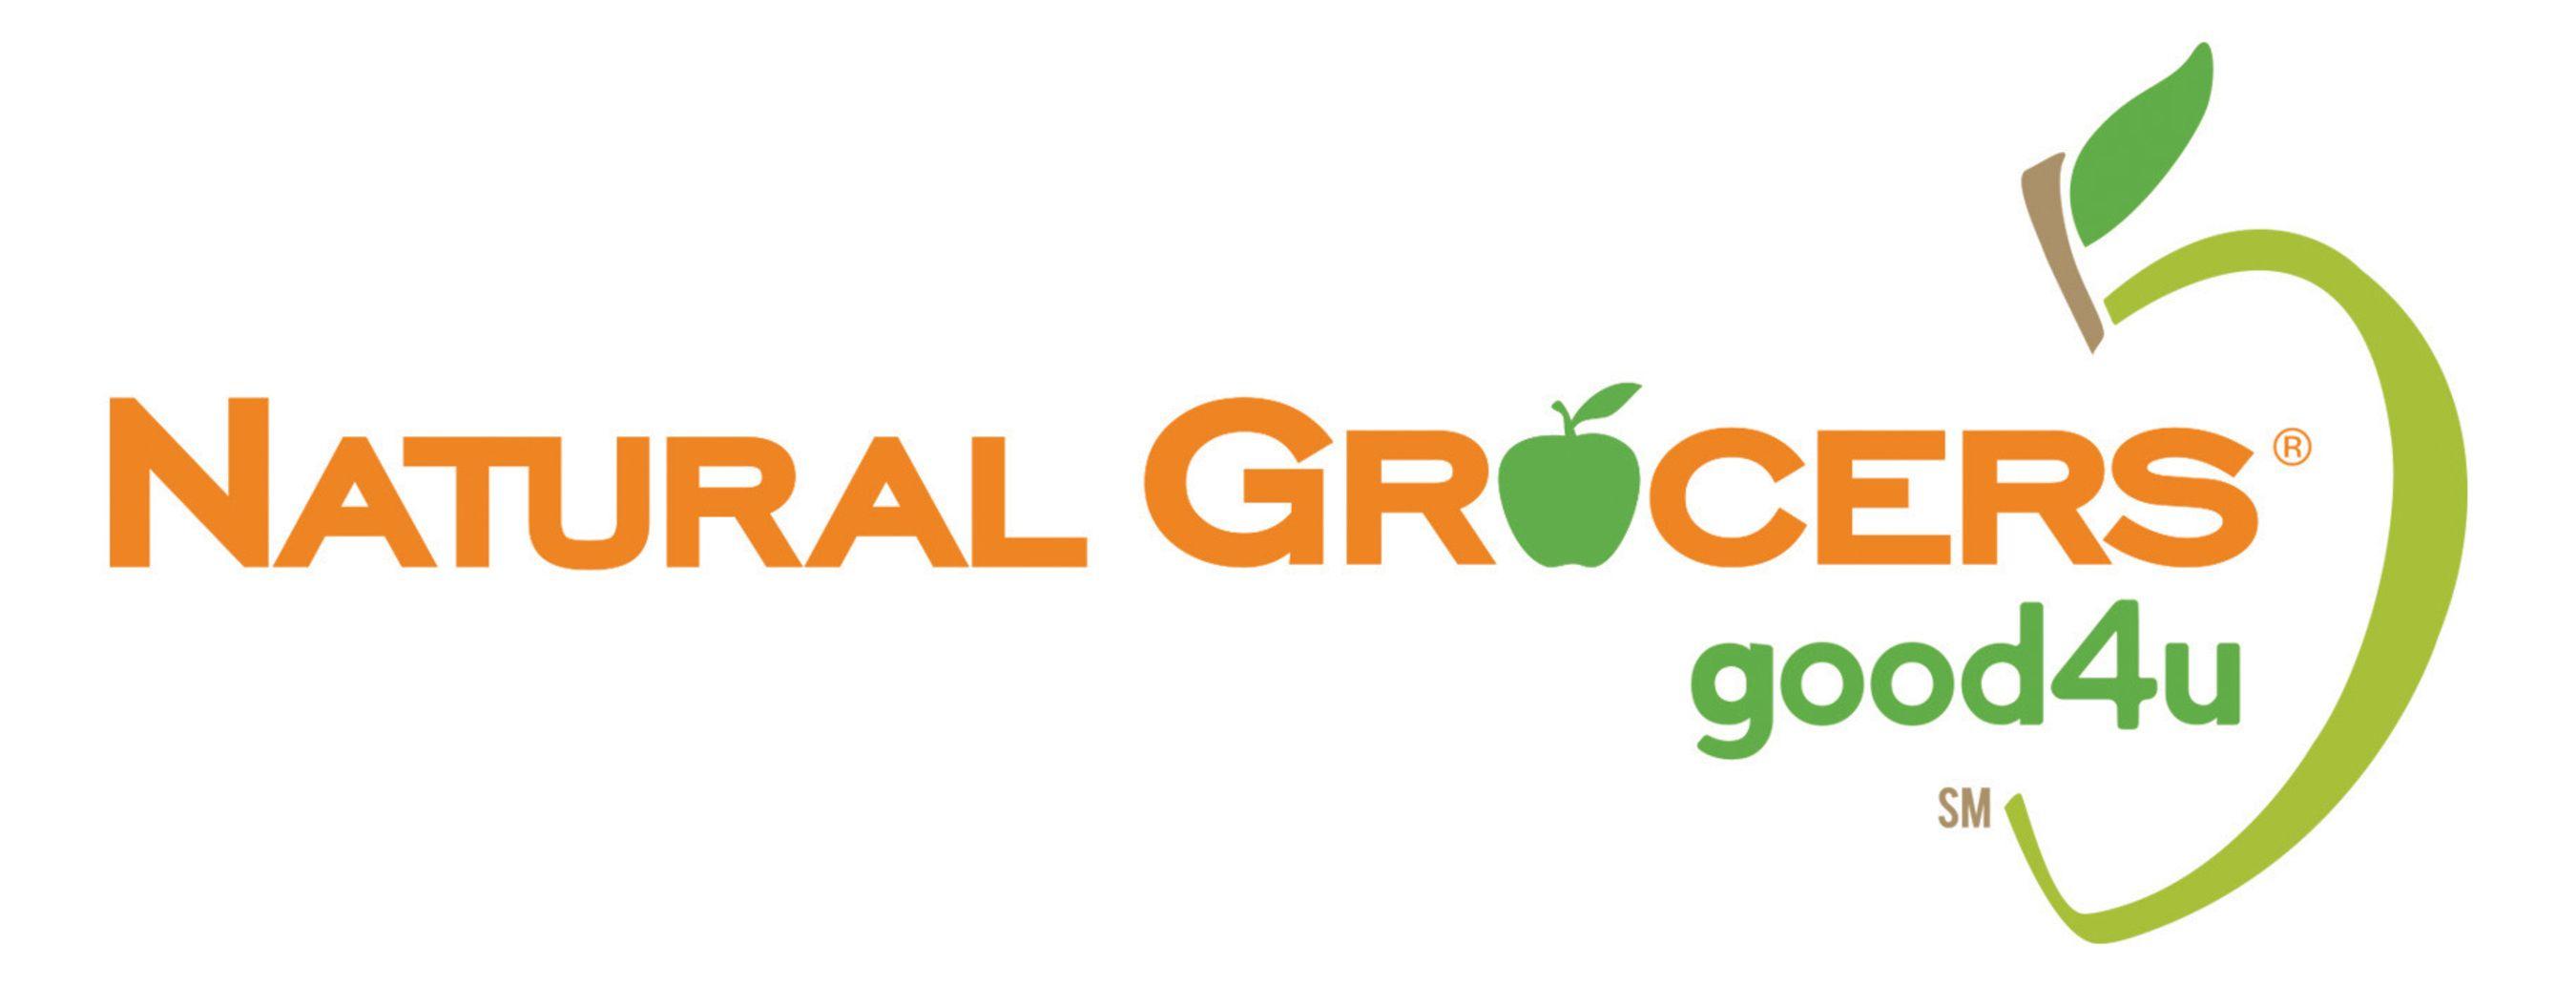 Natural Grocers Logo - Natural Grocers to Open Stores in Phoenix and Chandler May 31st